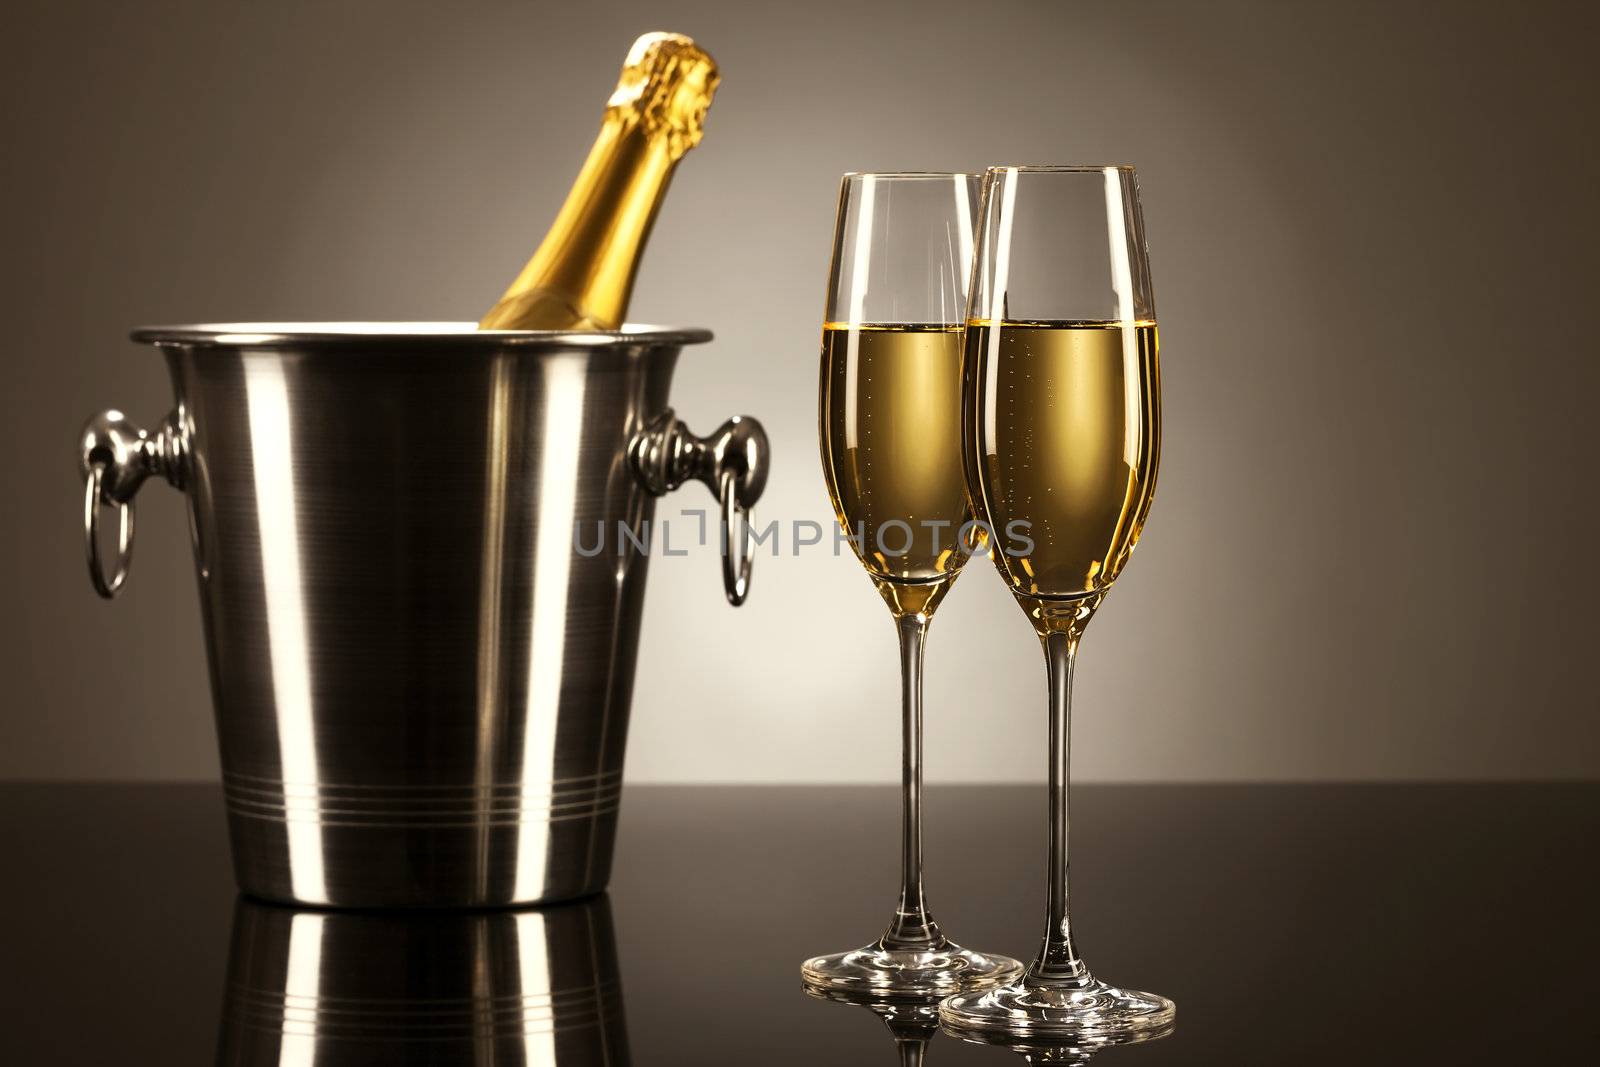 two glasses of champagne with a champagne bottle in a bucket on a mirror with spot light